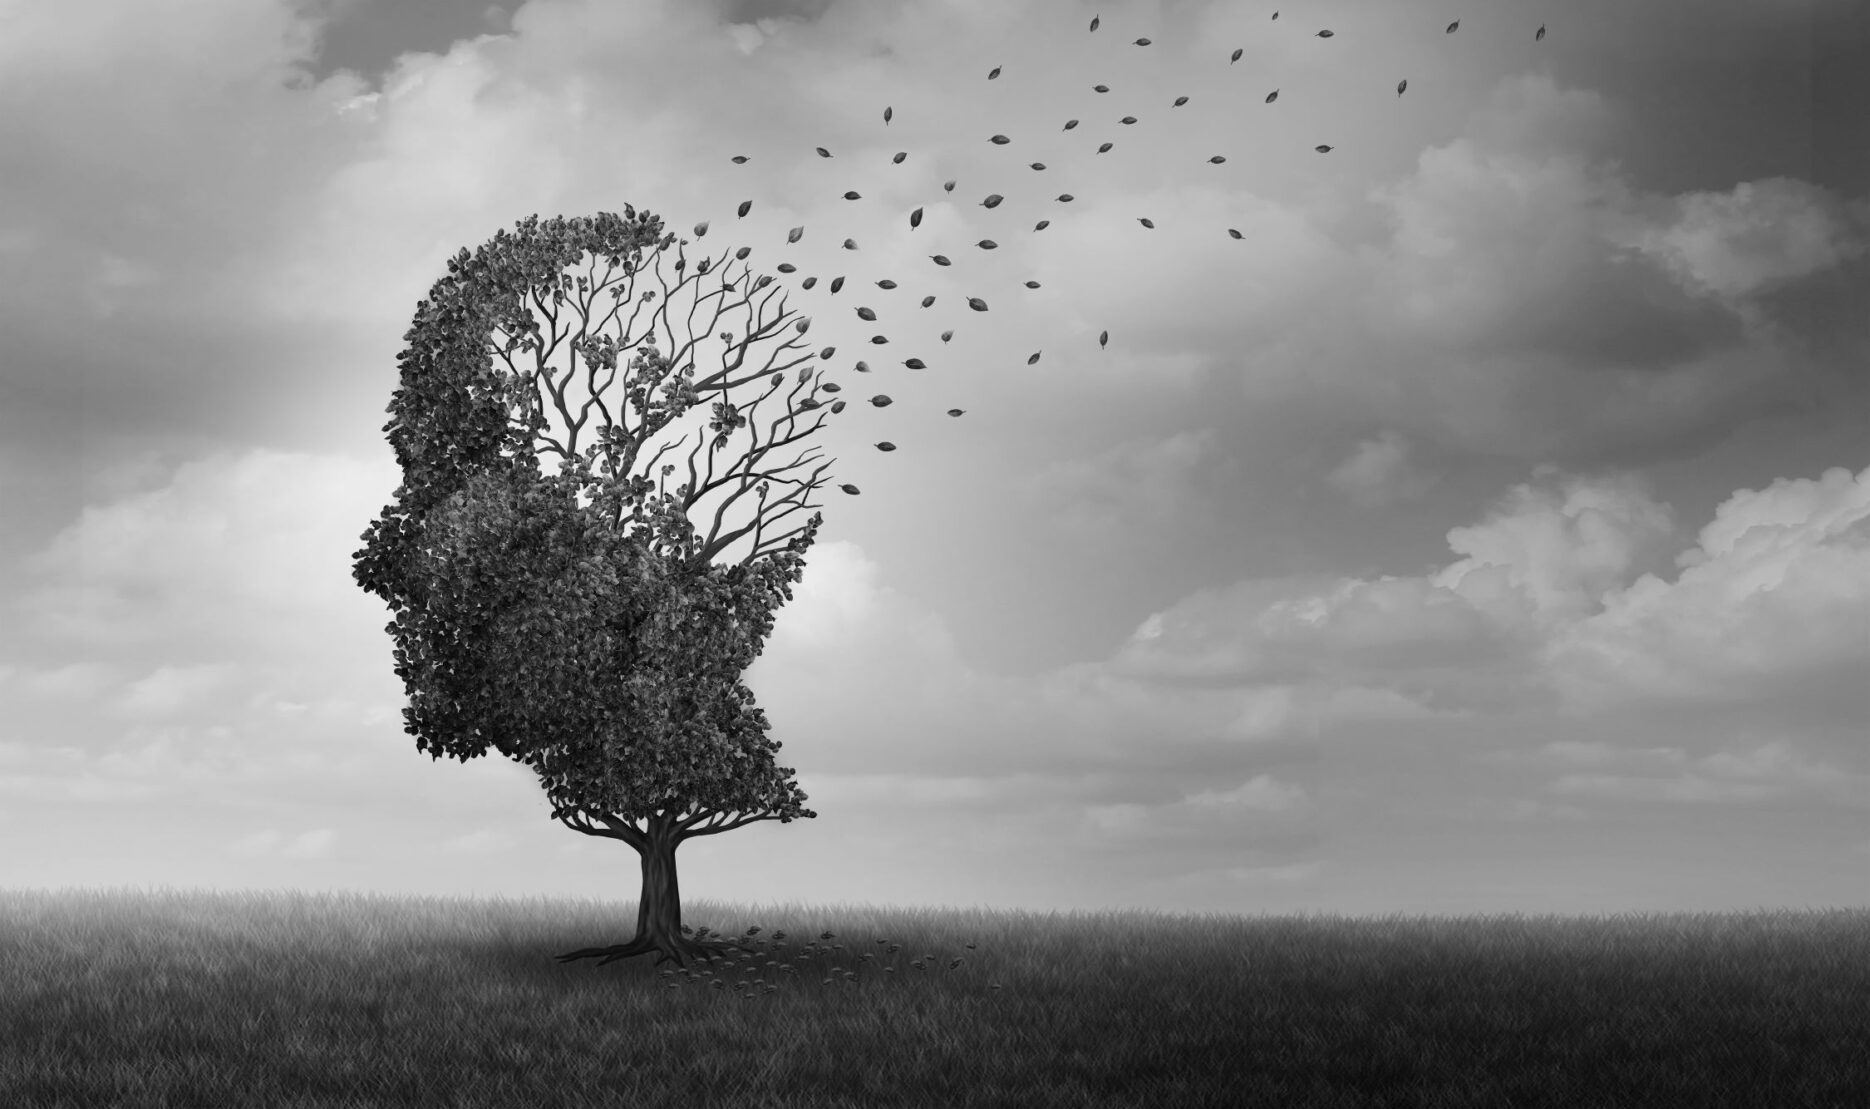 Black and white image of a solitary tree with half of its leaves shaped into a human profile, with leaves blowing away in the wind, symbolizing memory loss and the fragile boundary between presence and absence.